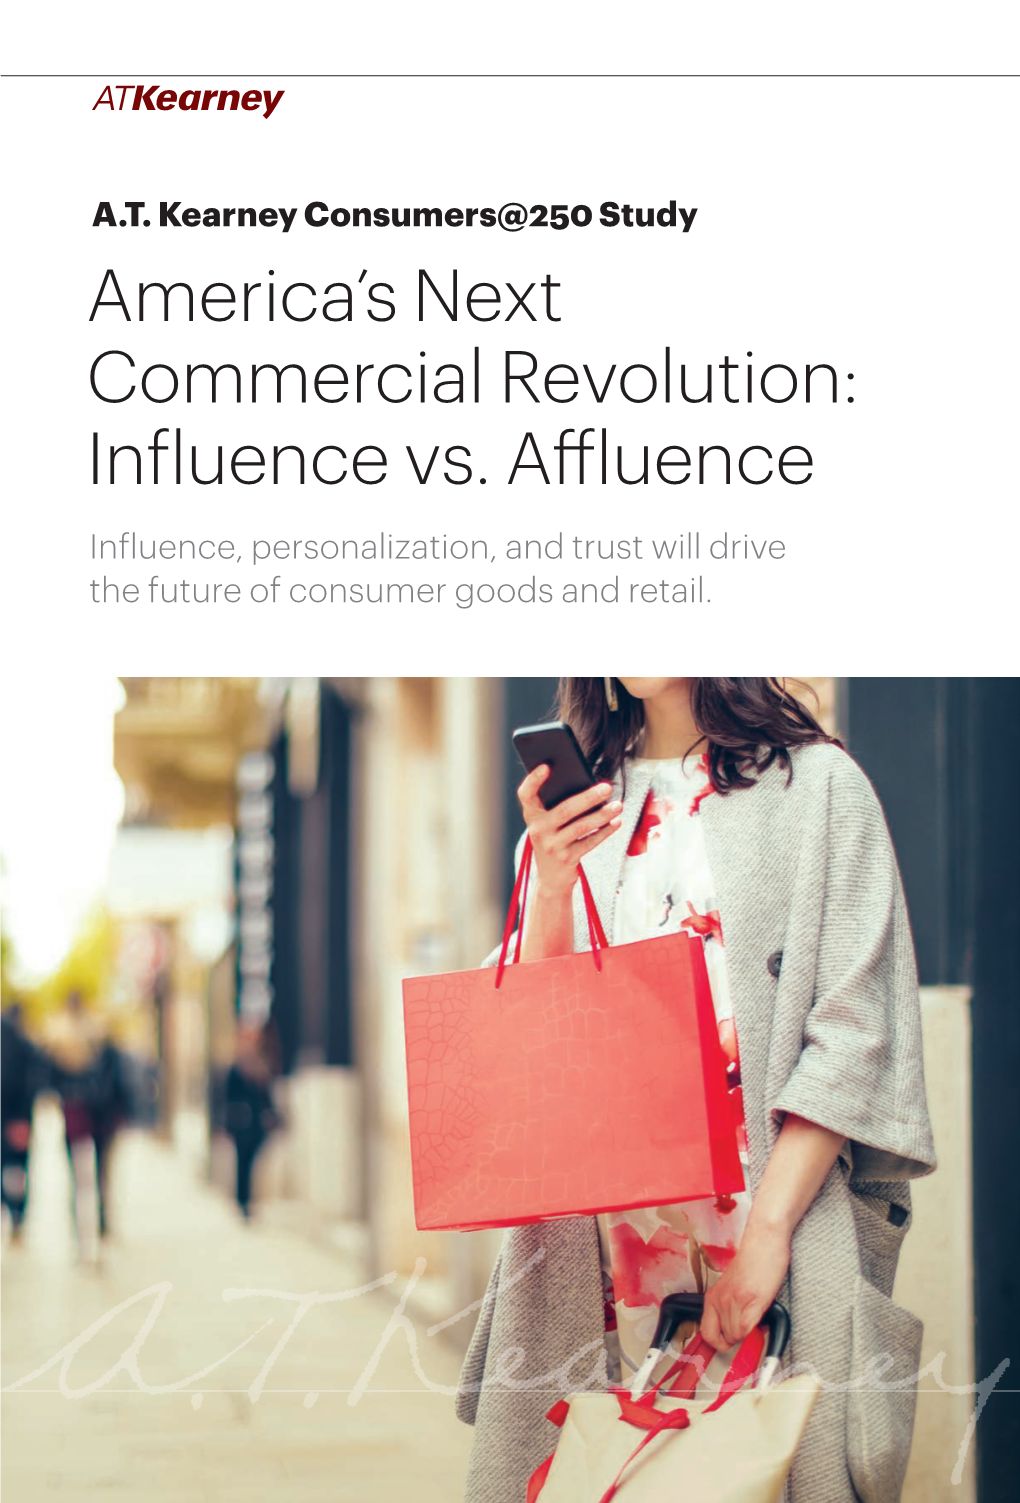 A.T. Kearney Consumers@250 Study: America's Next Commercial Revolution: Influence Vs. Affluence